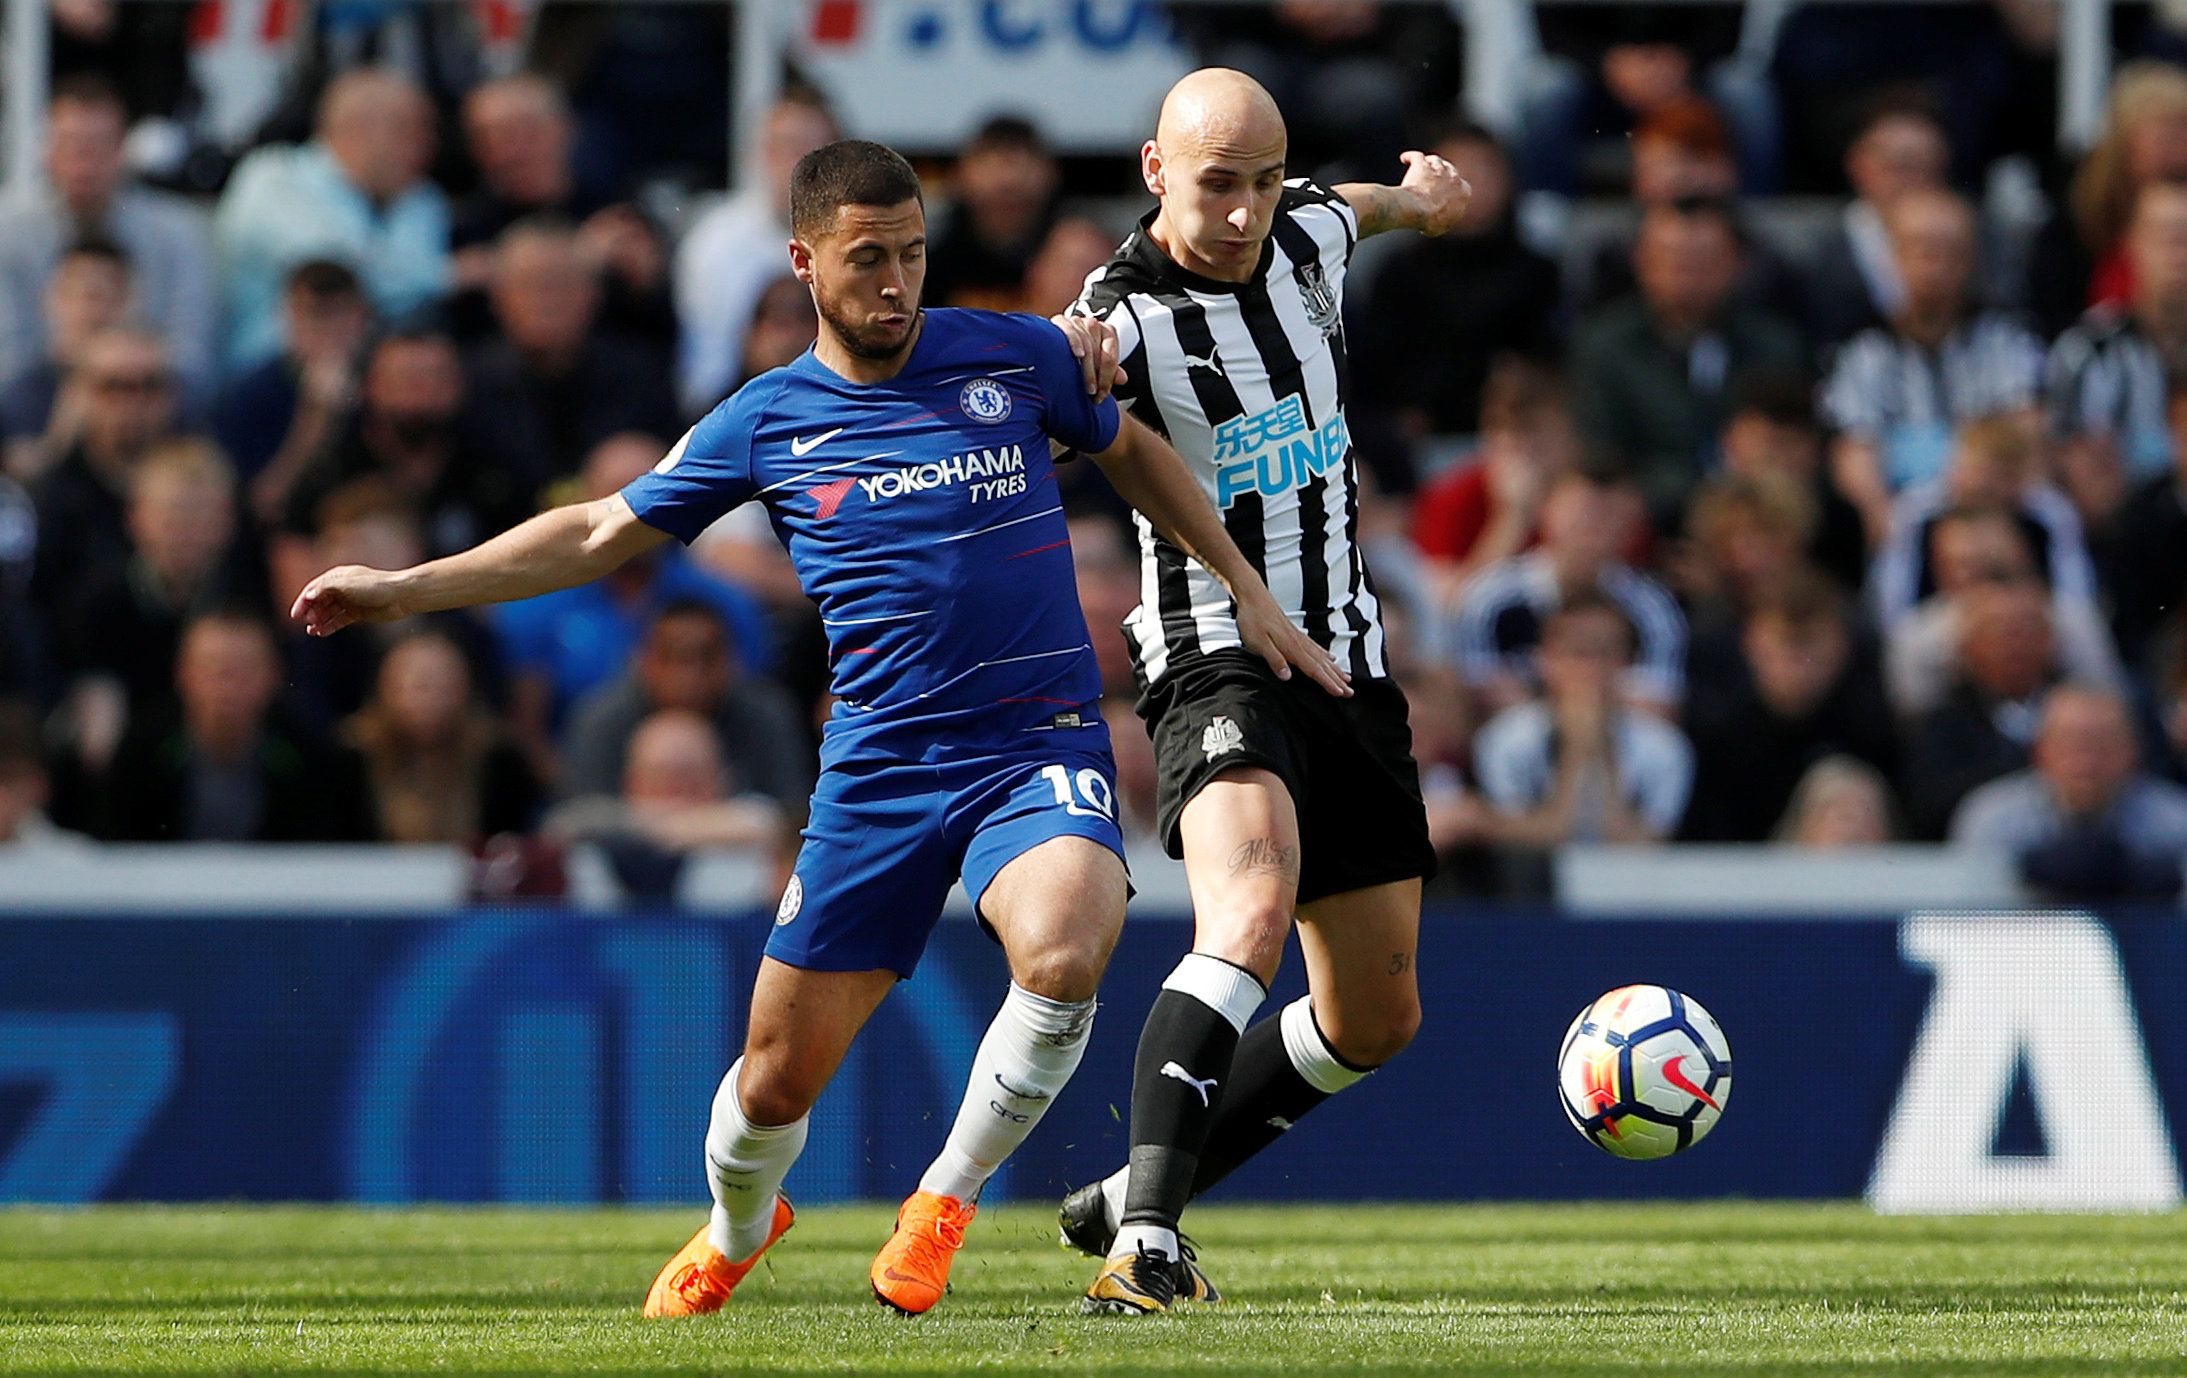 Soccer Football - Premier League - Newcastle United vs Chelsea - St James' Park, Newcastle, Britain - May 13, 2018   Chelsea's Eden Hazard in action with Newcastle United's Jonjo Shelvey    Action Images via Reuters/Lee Smith    EDITORIAL USE ONLY. No use with unauthorized audio, video, data, fixture lists, club/league logos or 